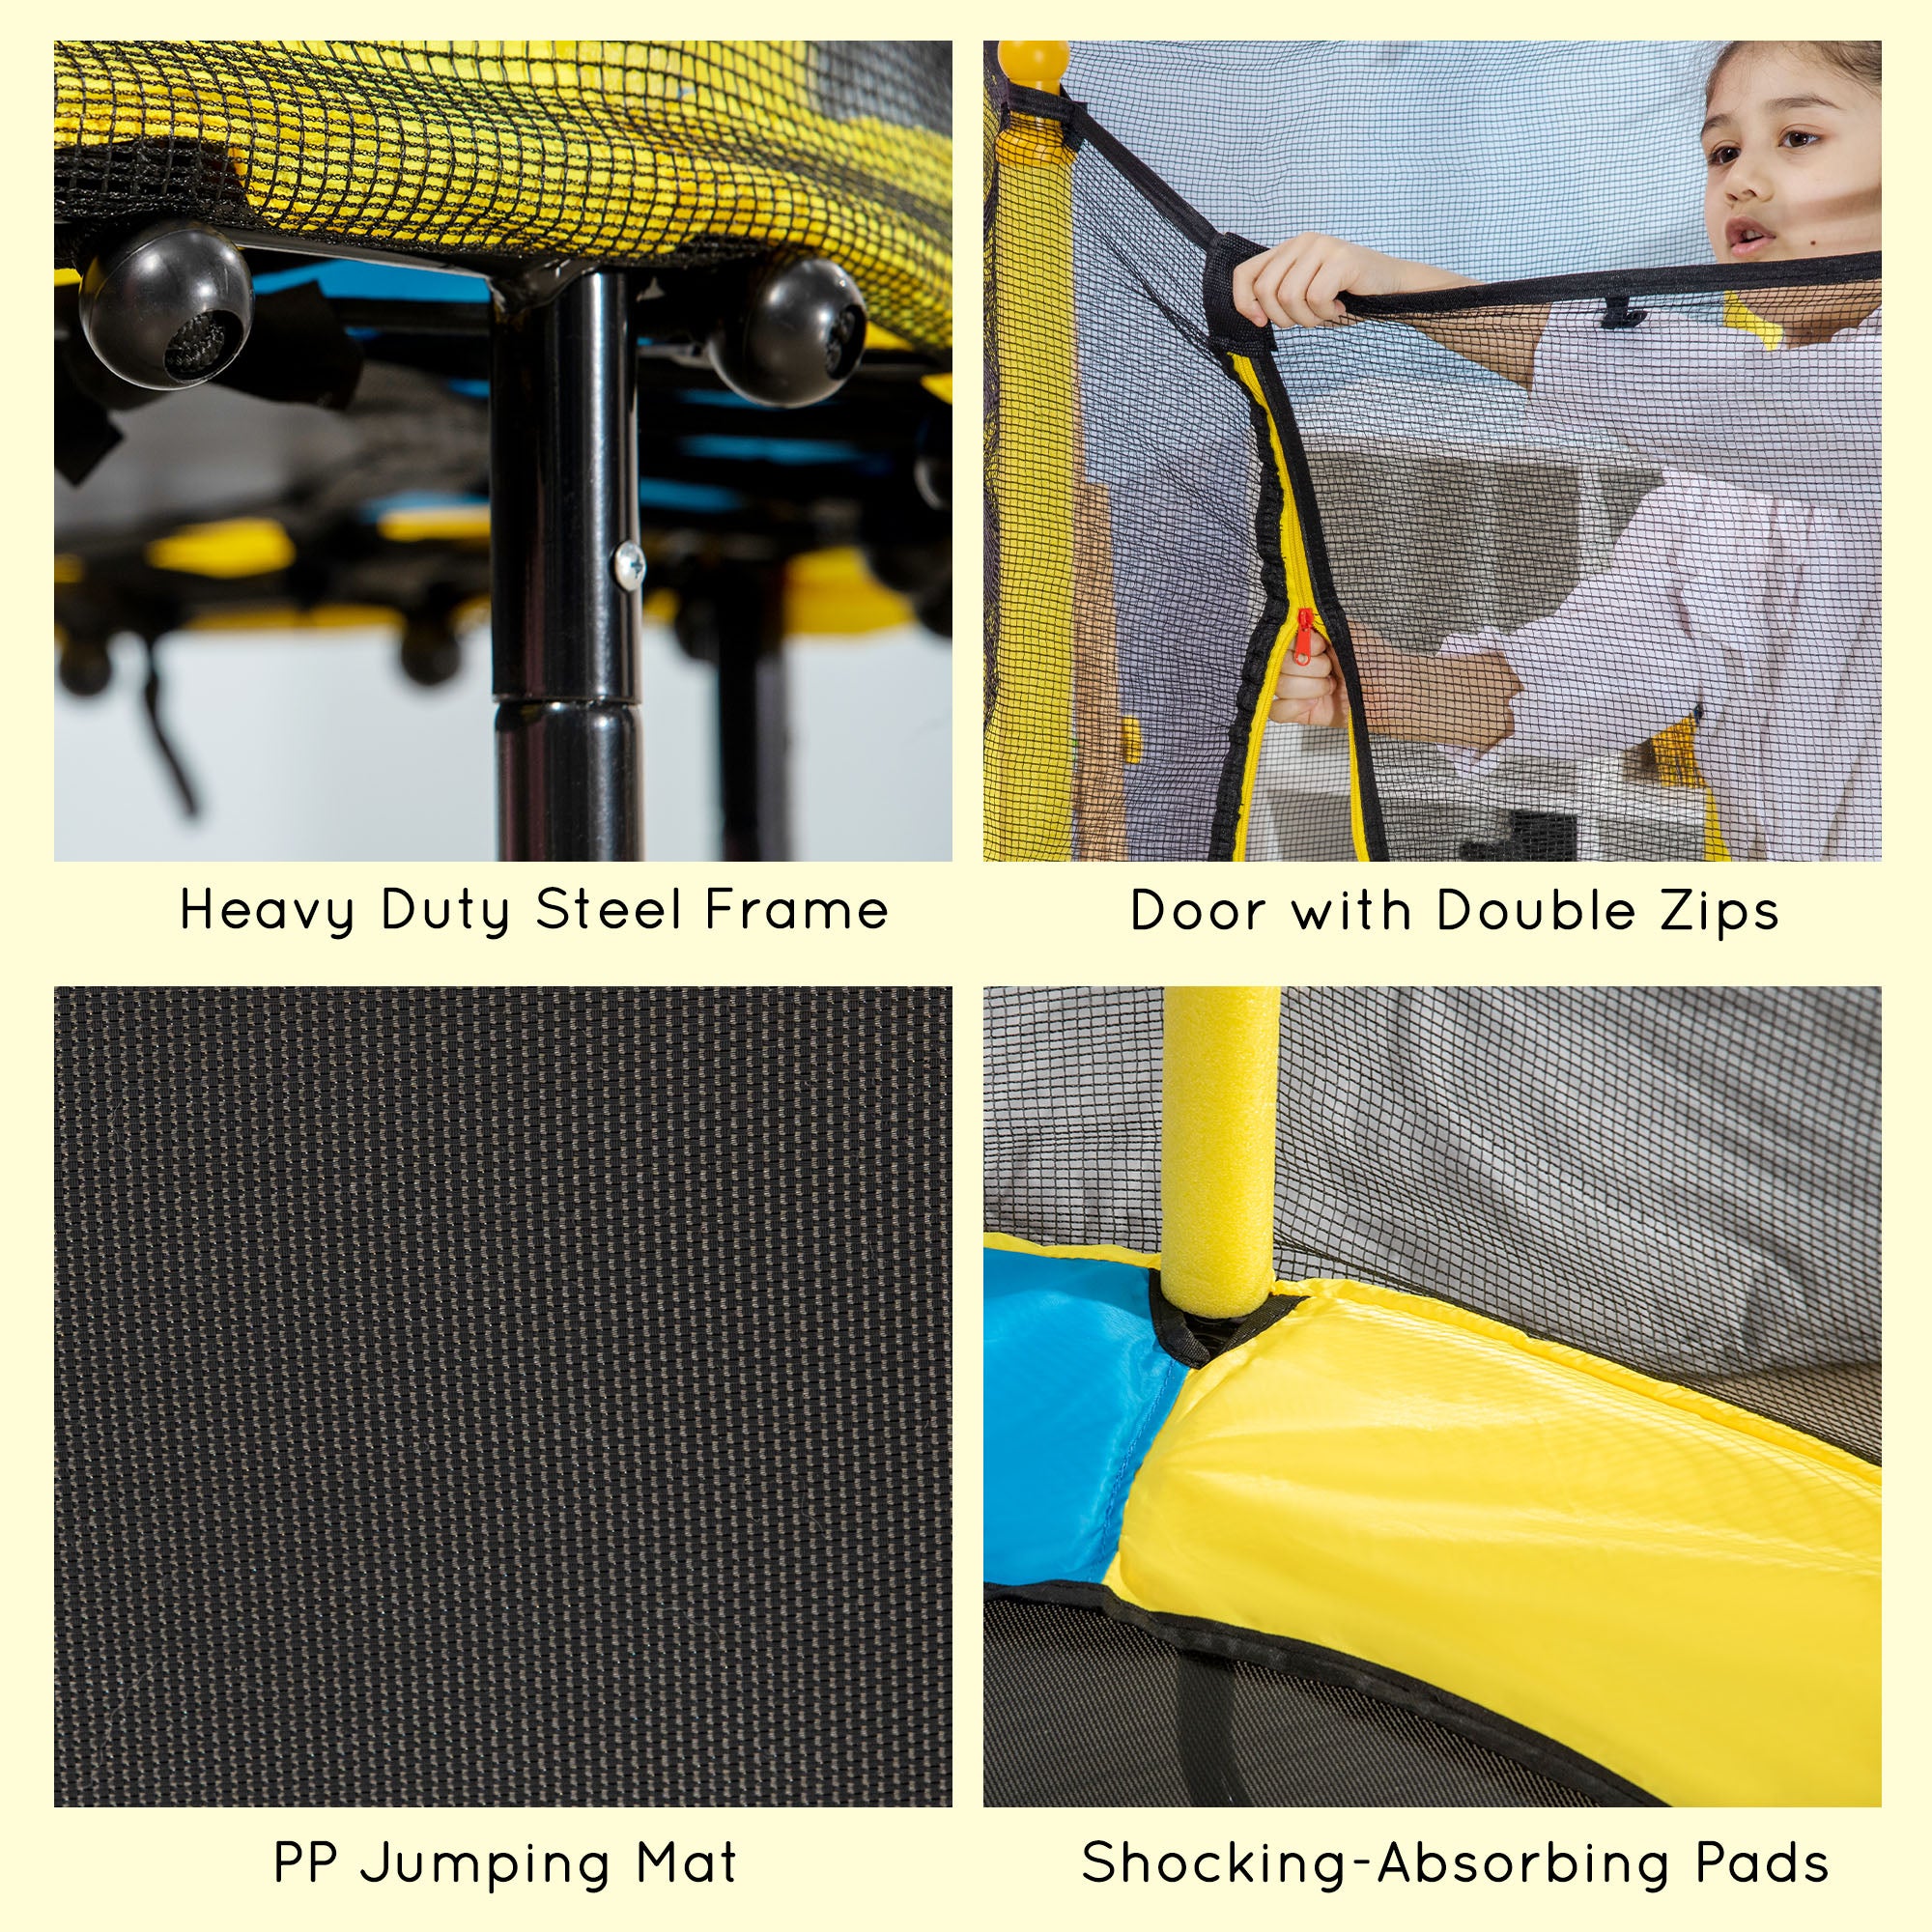 HOMCOM 4.6FT / 55 Inch Kids Trampoline with Enclosure Safety Net Pads Indoor Trampolines for Child 1-10 Years Old, Yellow